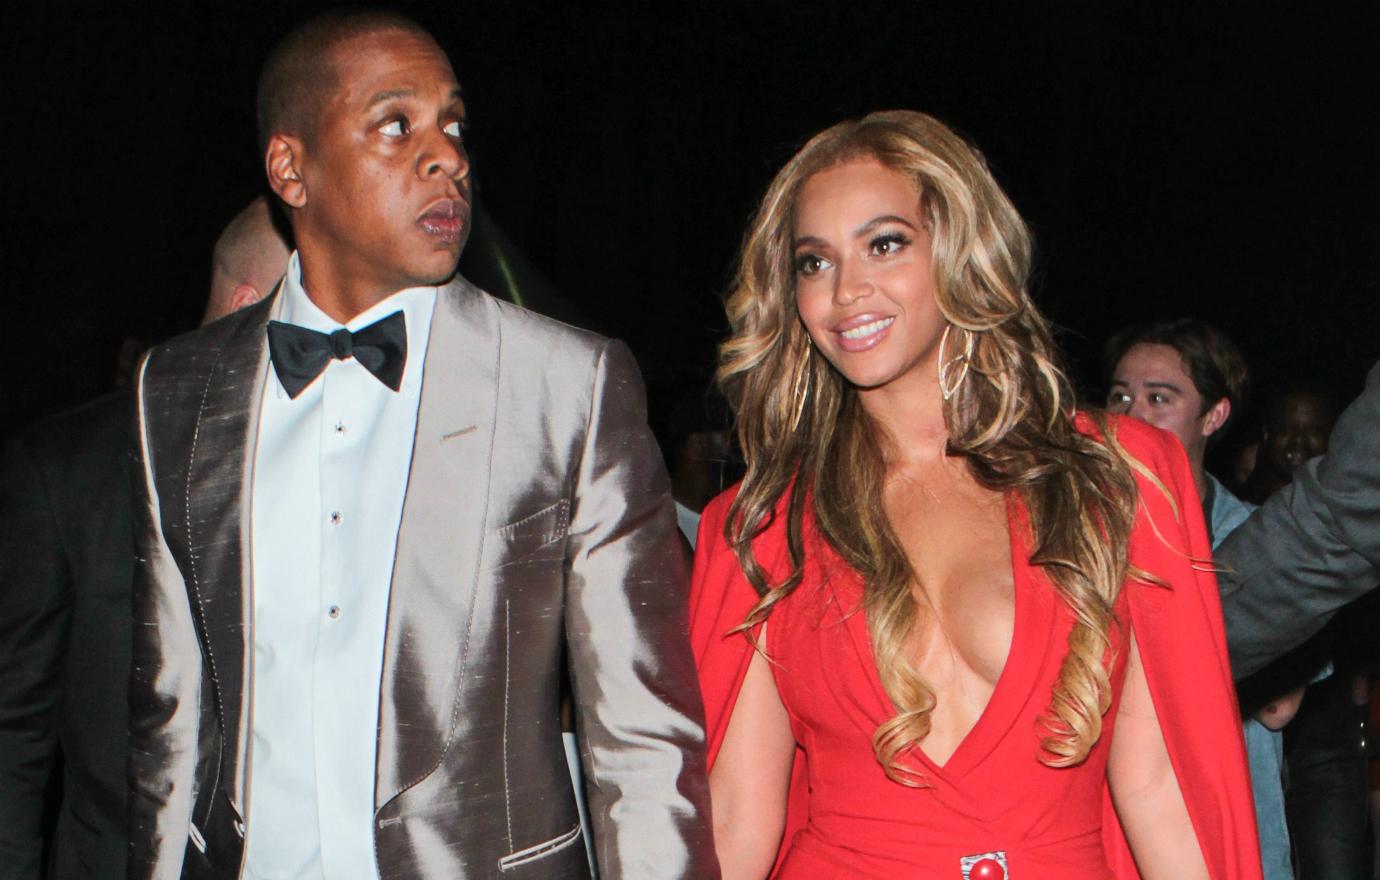 Beyonce wears a red dress with plunging neckline and open sleeves, hair worn long and wavy, alongside Jay Z at a 2015 boxing match.